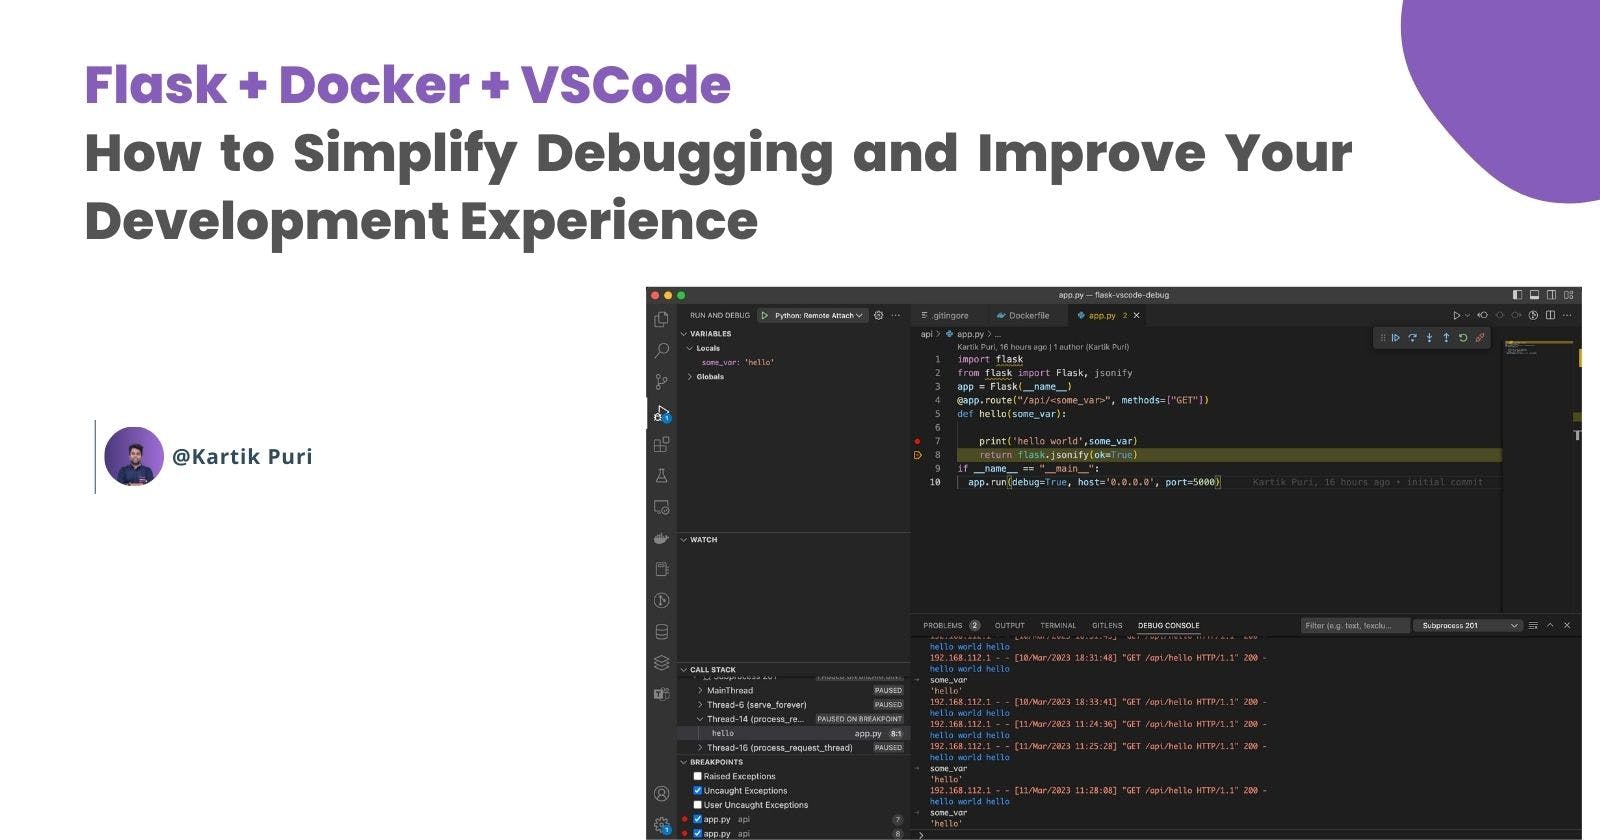 Flask + Docker + VSCode: How to Simplify Debugging and Improve Your Development Experience